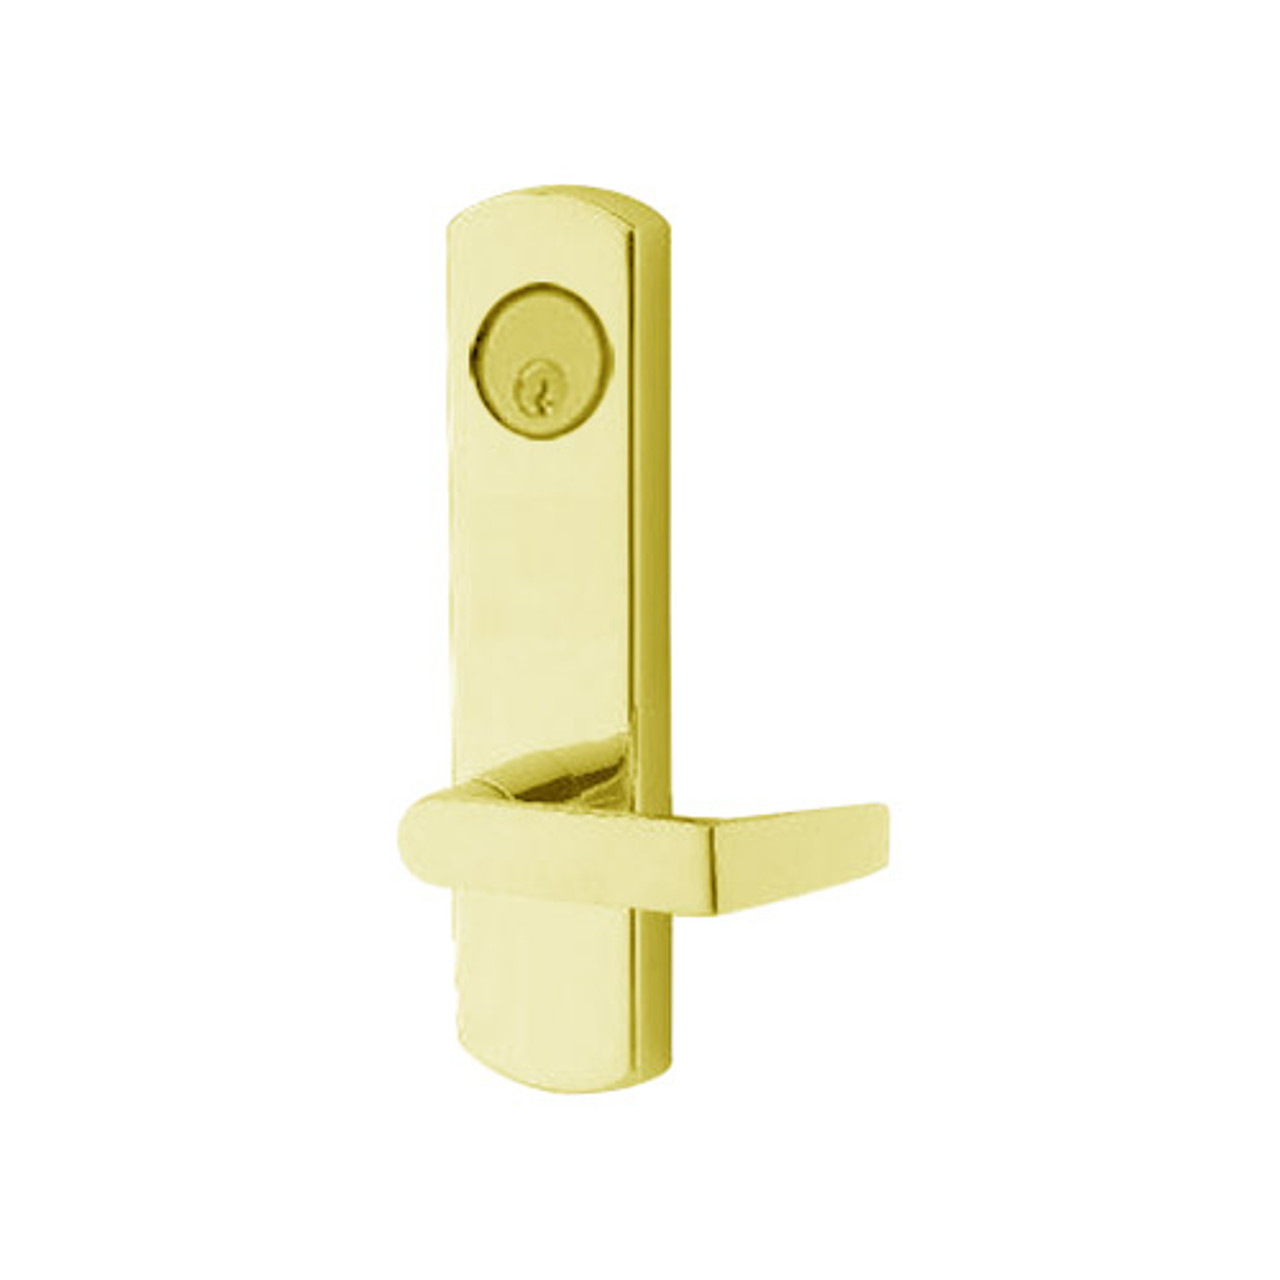 3080-03-0-34-US3 Adams Rite Standard Entry Trim with Square Lever in Bright Brass Finish